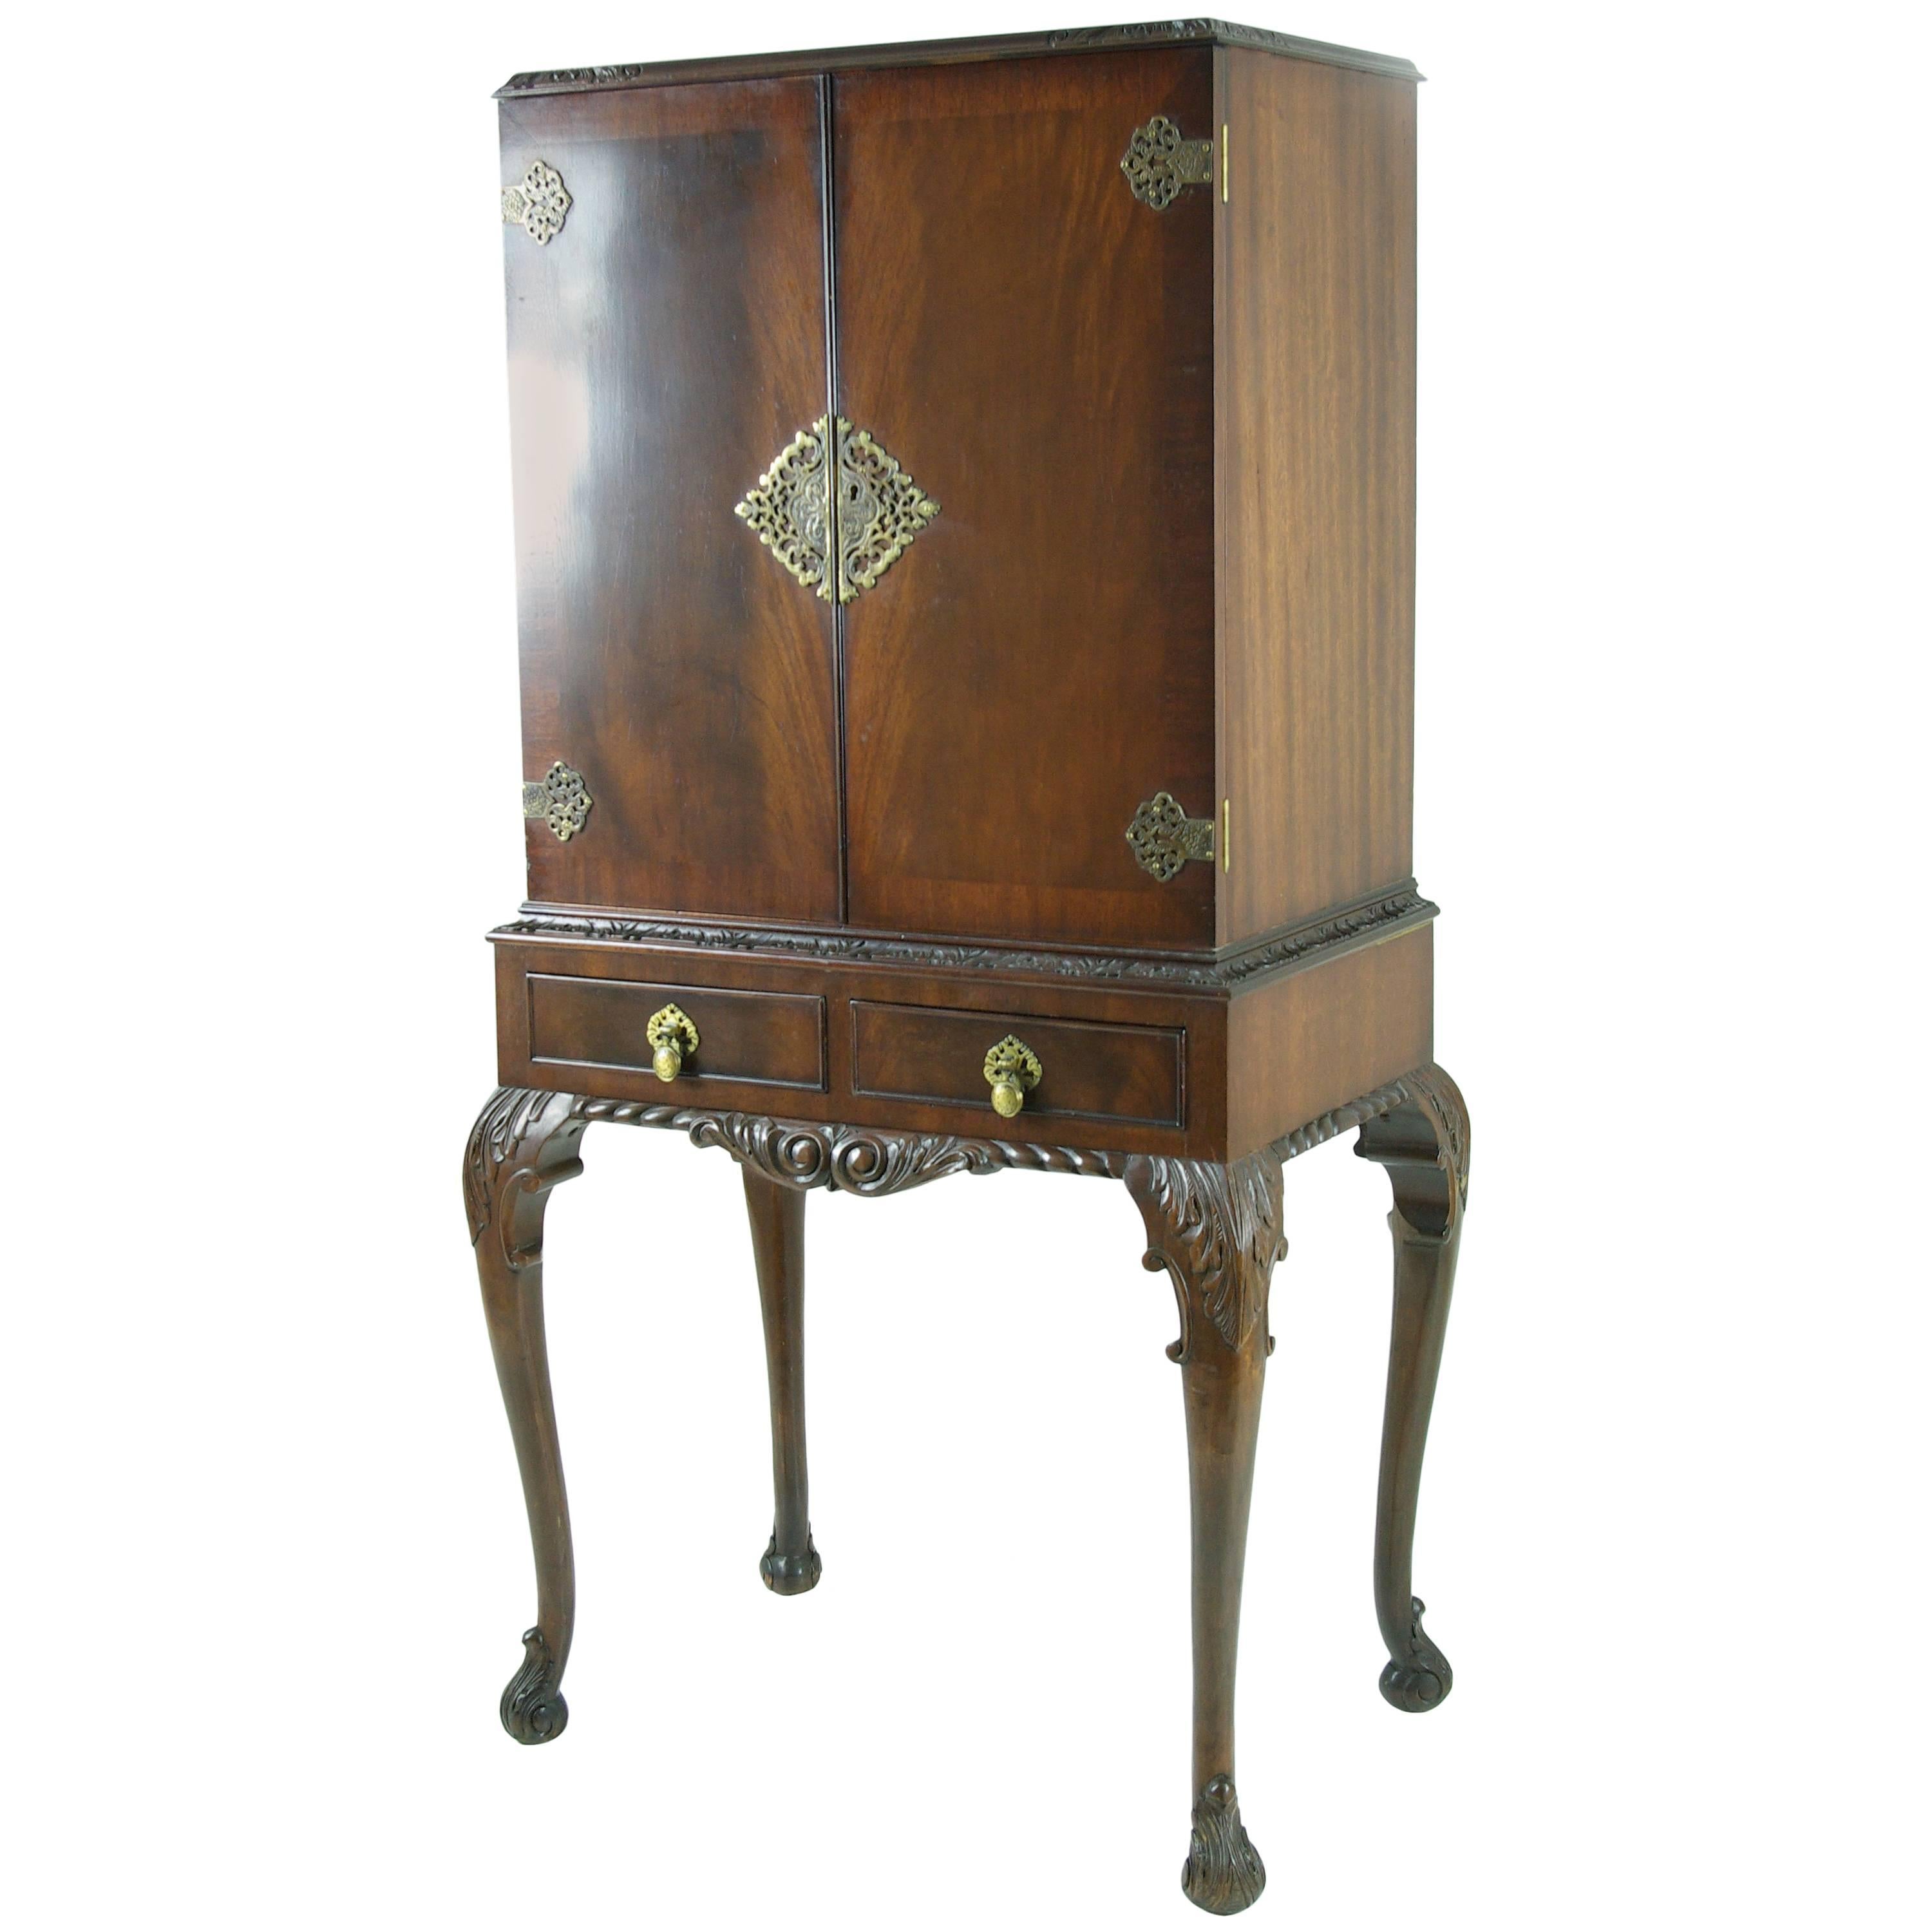 Antique Scottish Burr Walnut Drinks, Cocktail Cabinet with Fitted Interior